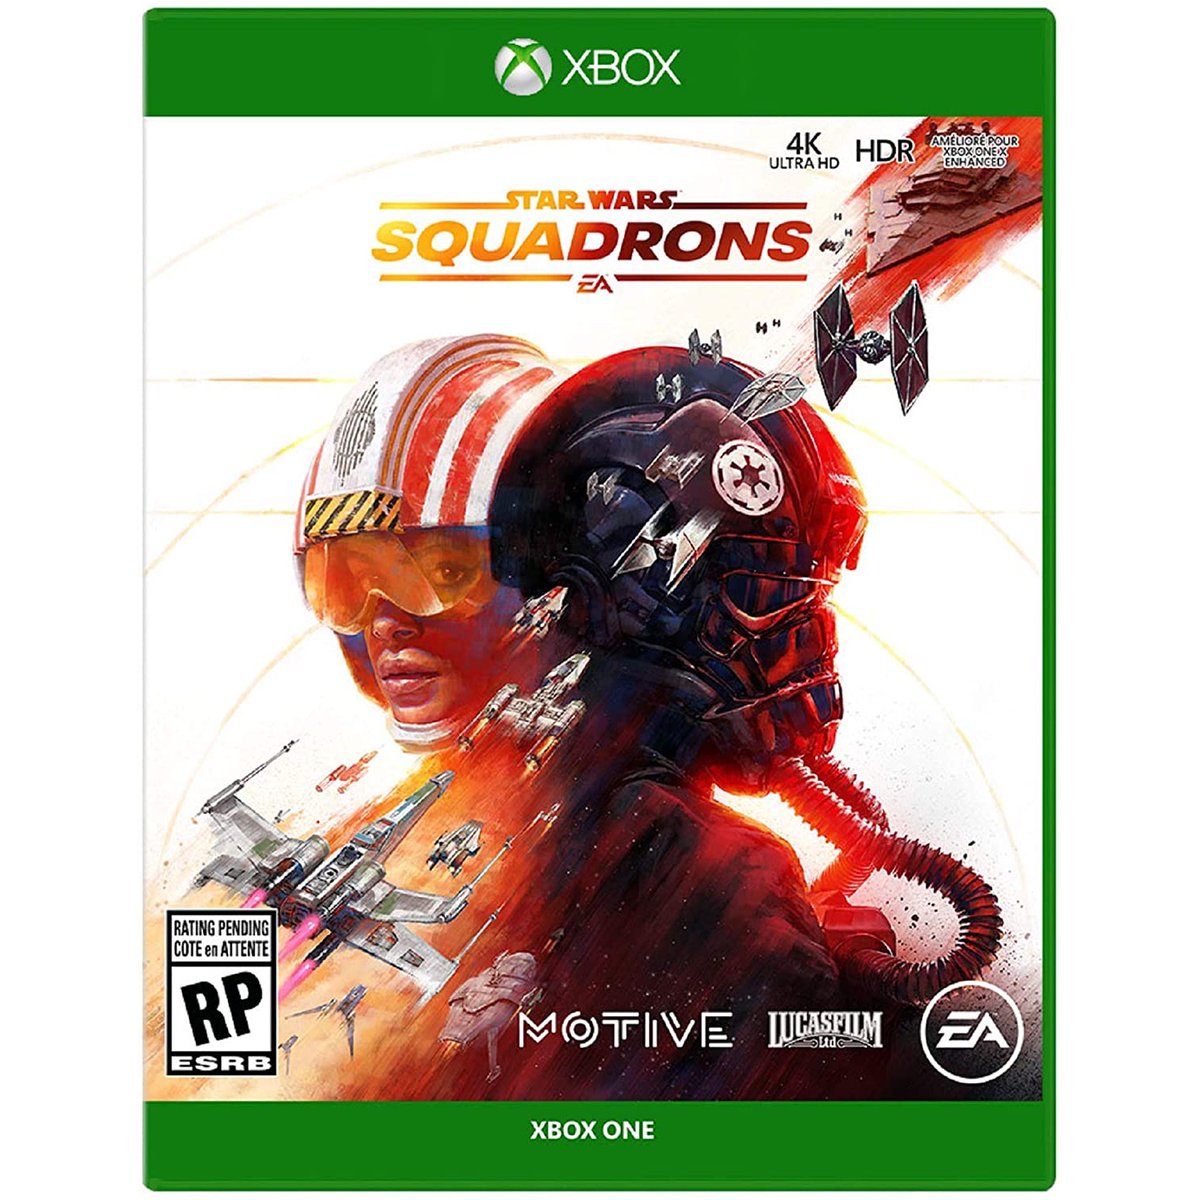 Star Wars Squadrons [Xbox] is $9.96 ($45 off) @ Amazon - https://t.co/vw7lJUzHFC

PS version is $15 - https://t.co/Gh6Ind8rbM https://t.co/aX6aby3WEr